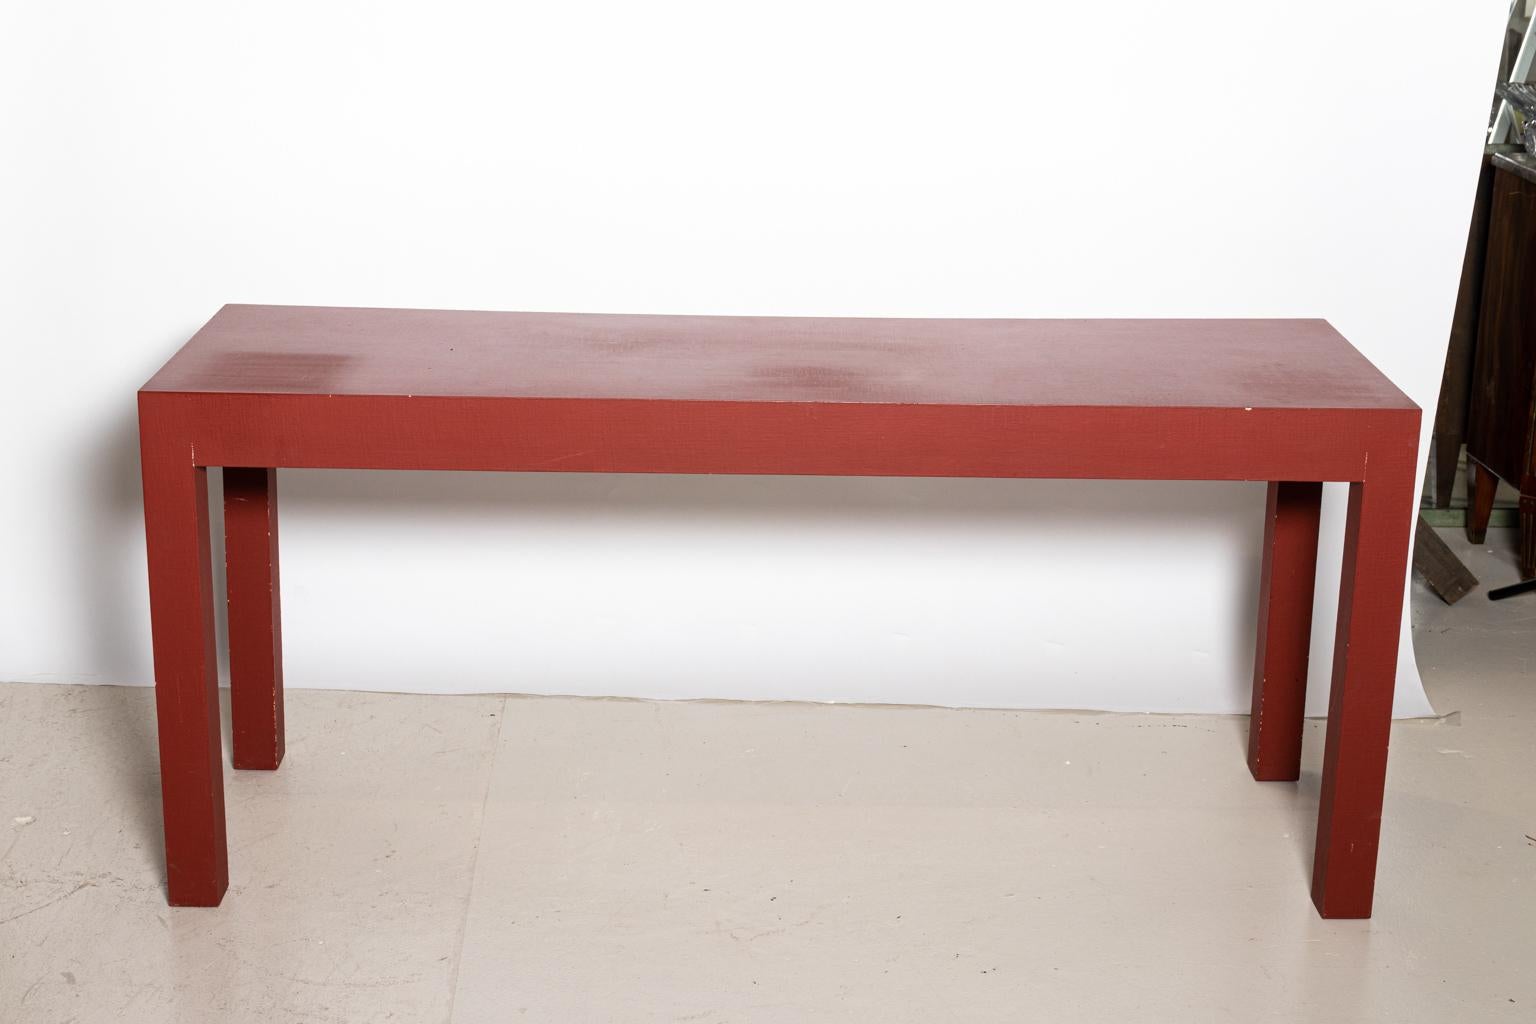 Red painted console with two drawers by Minic Custom Woodwork. Please note of wear consistent with age including chips and paint loss as seen on the corners Made in the United States. Maker's plaque featured on the inside of the drawer.